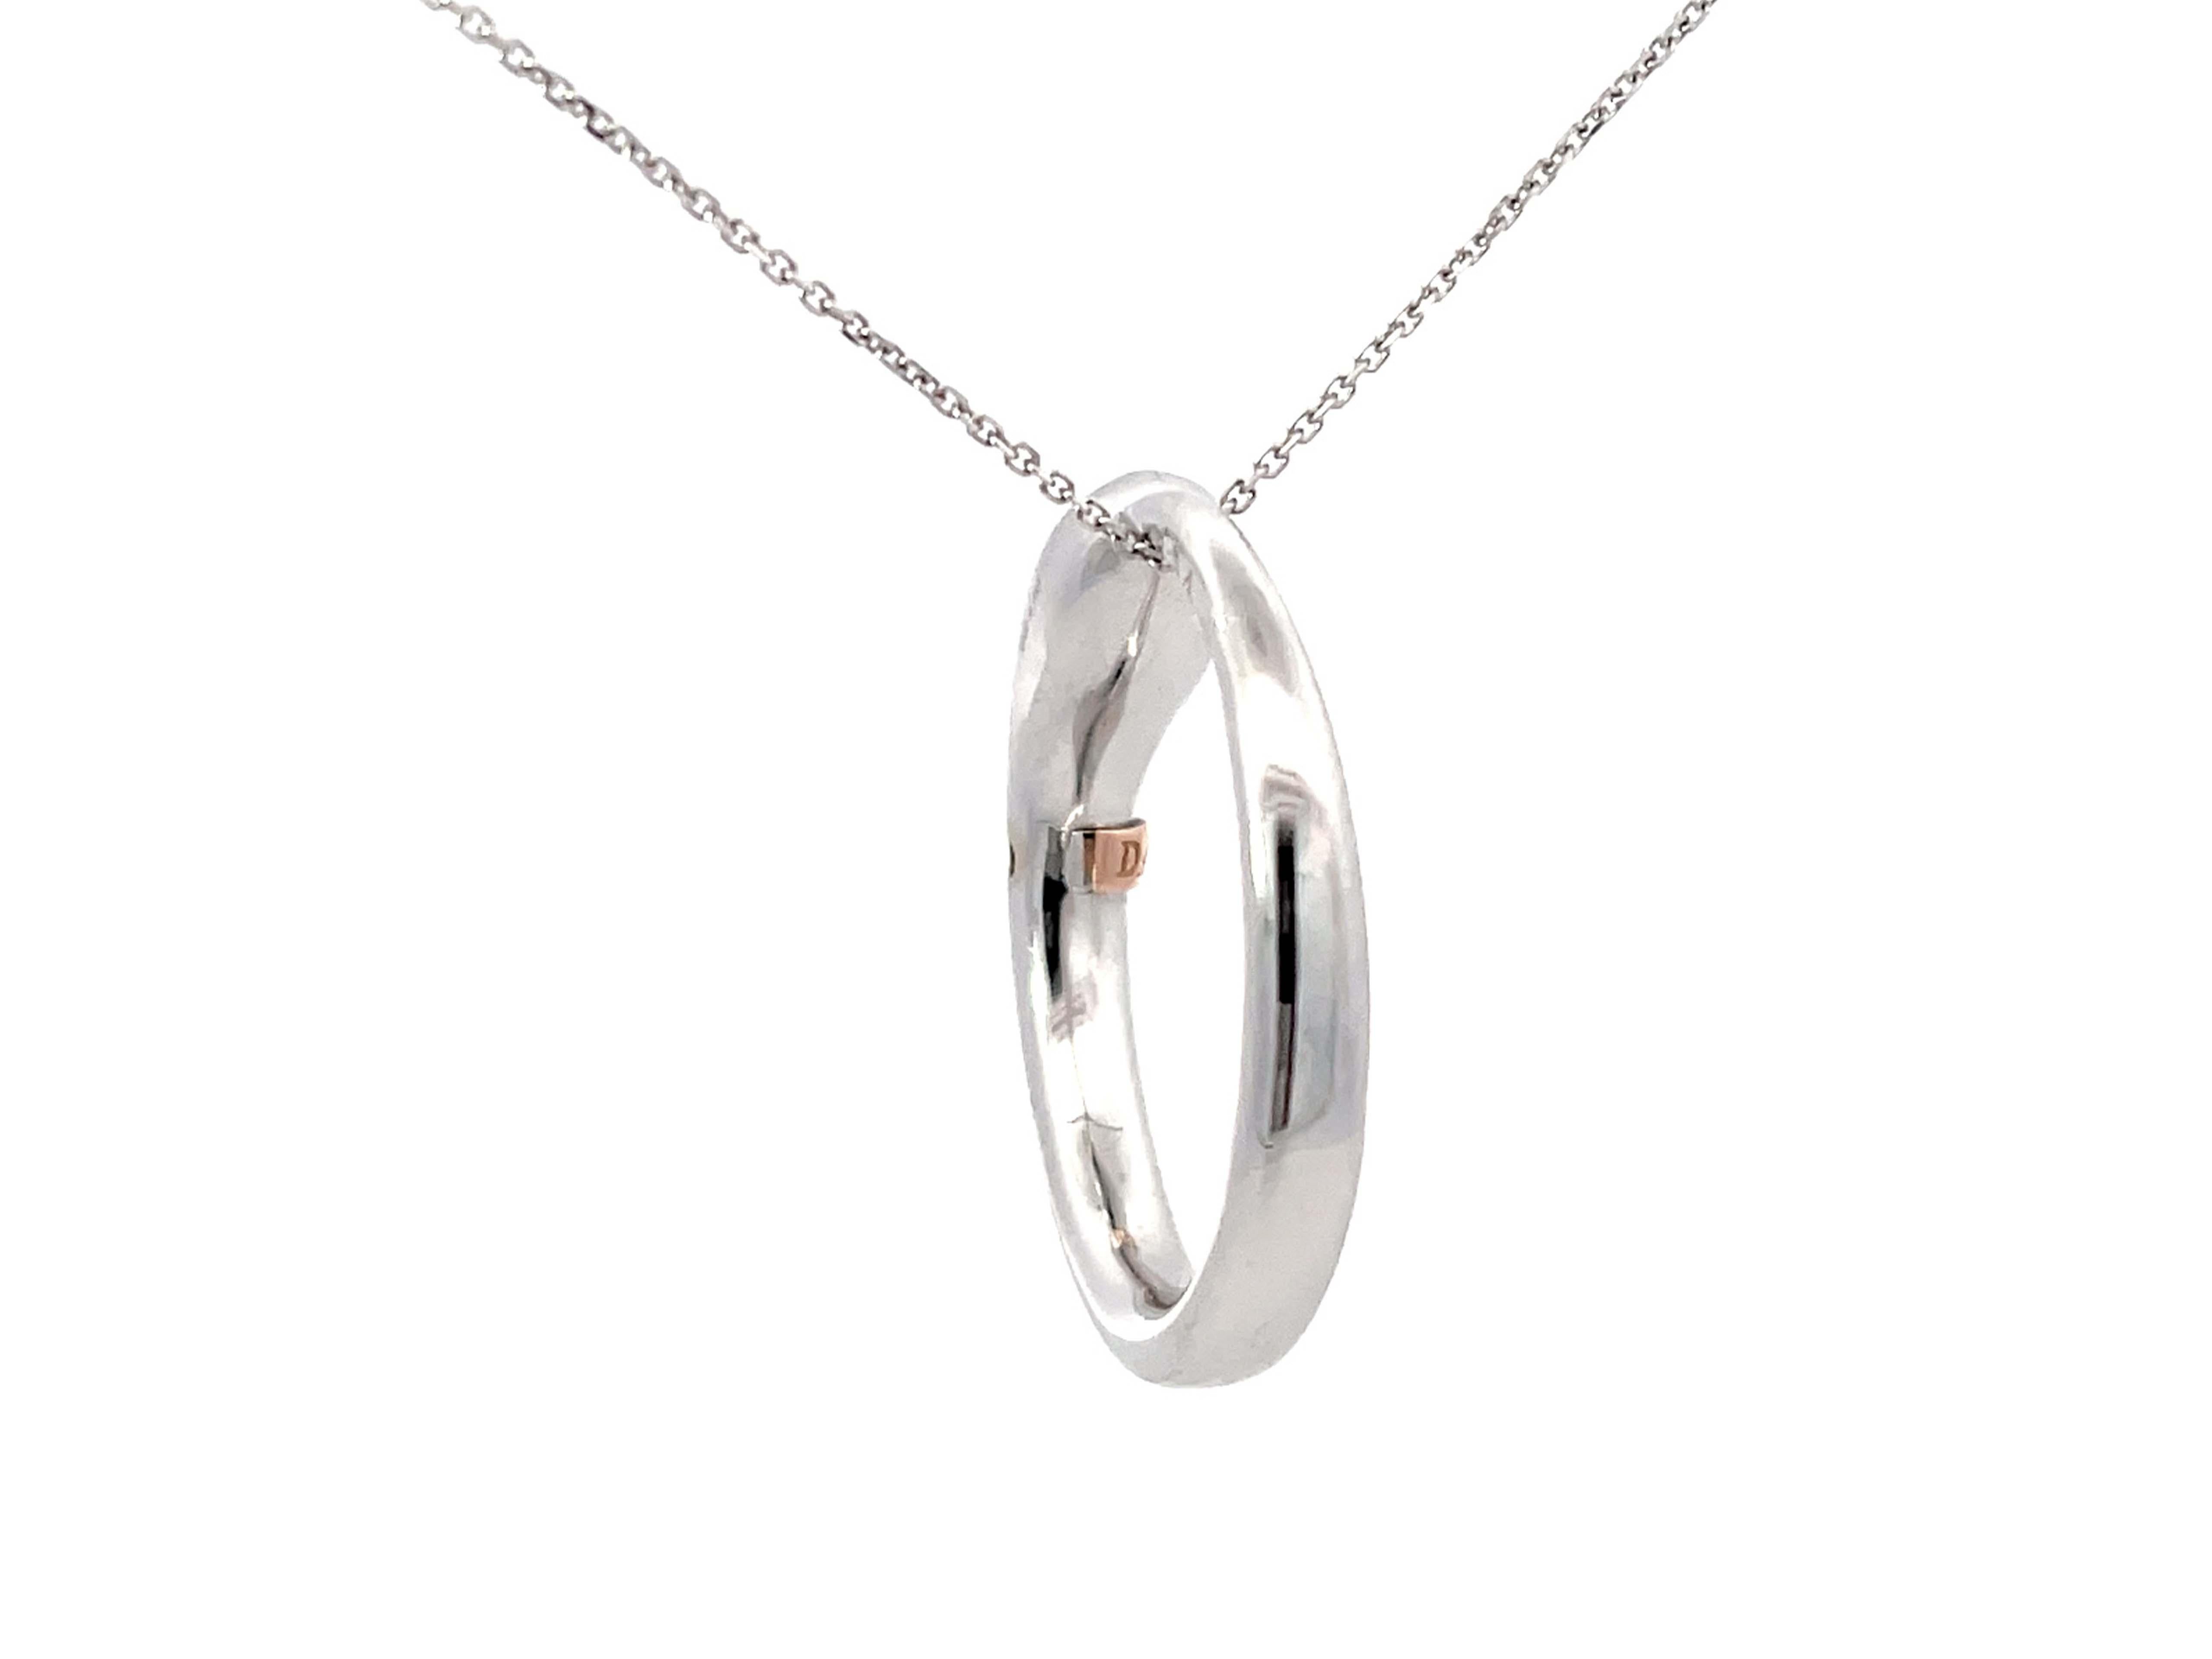 Modern Damiani Infinito Snake Pendant Necklace in 18k White Gold For Sale